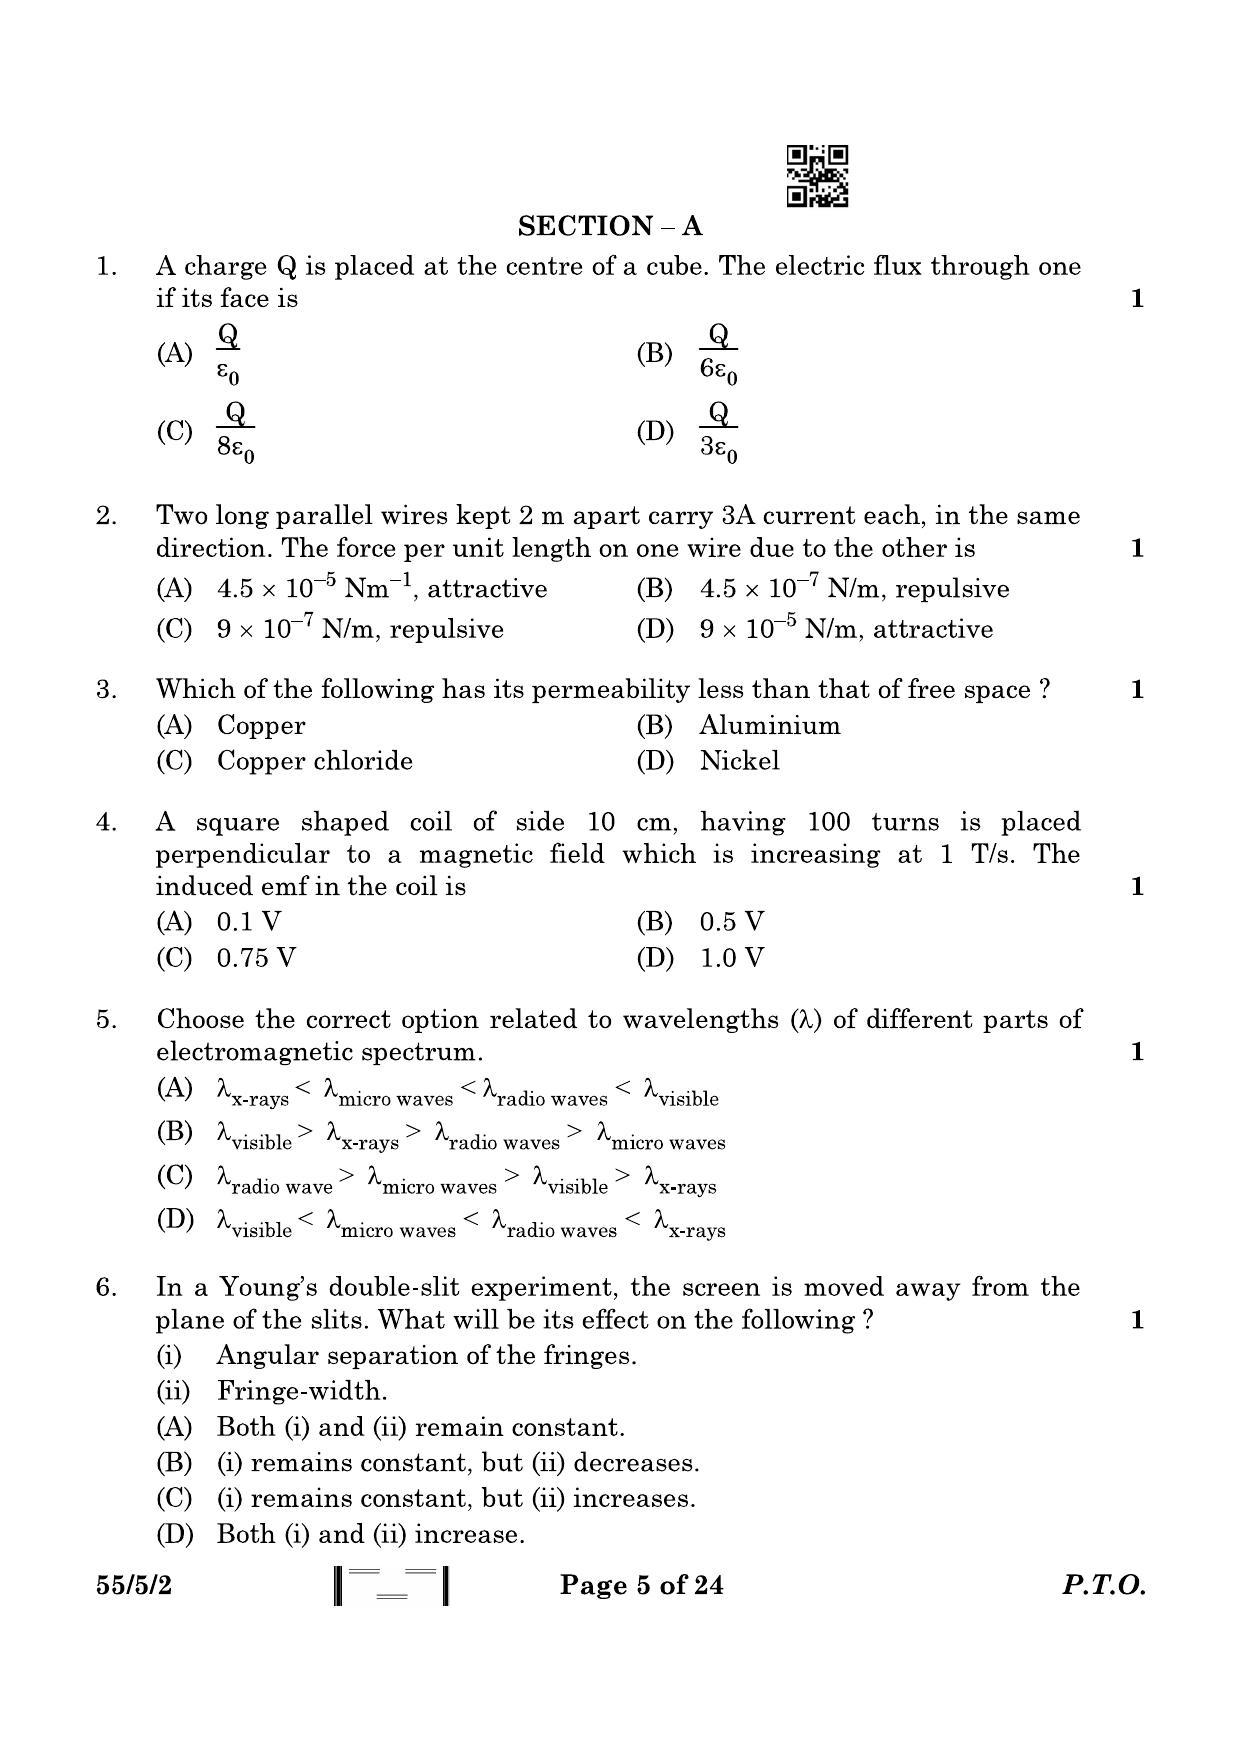 CBSE Class 12 55-5-2 Physics 2023 Question Paper - Page 5